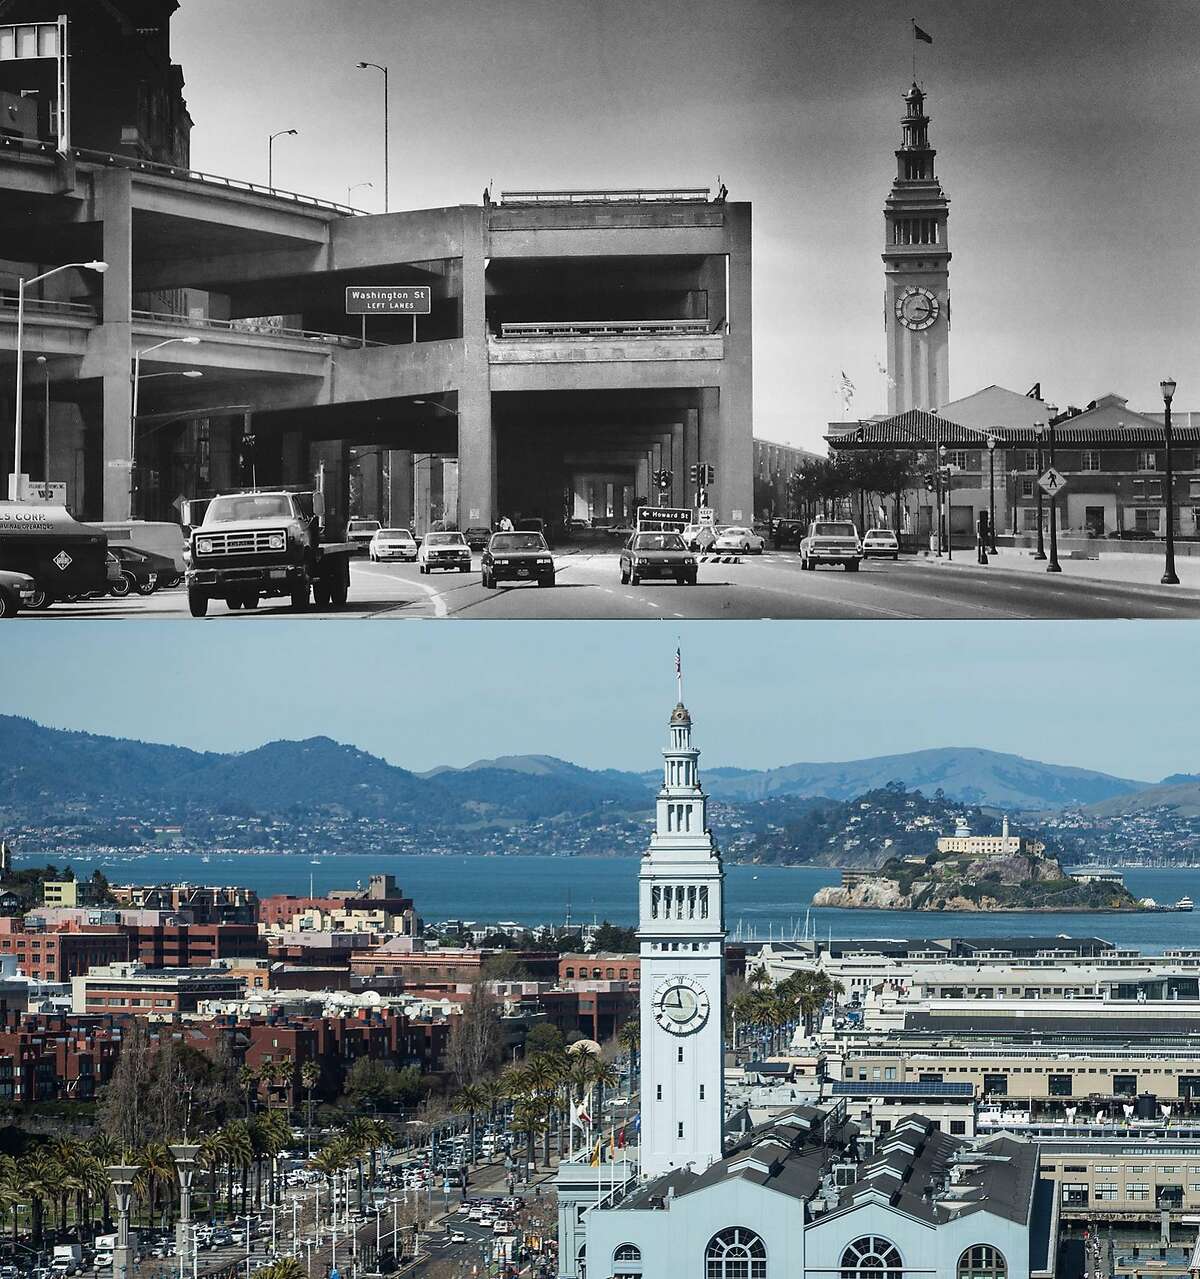 The Embarcadero Freeway, which was never finished and never connected the Golden Gate Bridge and the Bay Bridge, is seen on March 23, 1985. The Ferry Building photographed Tuesday, March 6, 2018 in San Francisco, Calif.